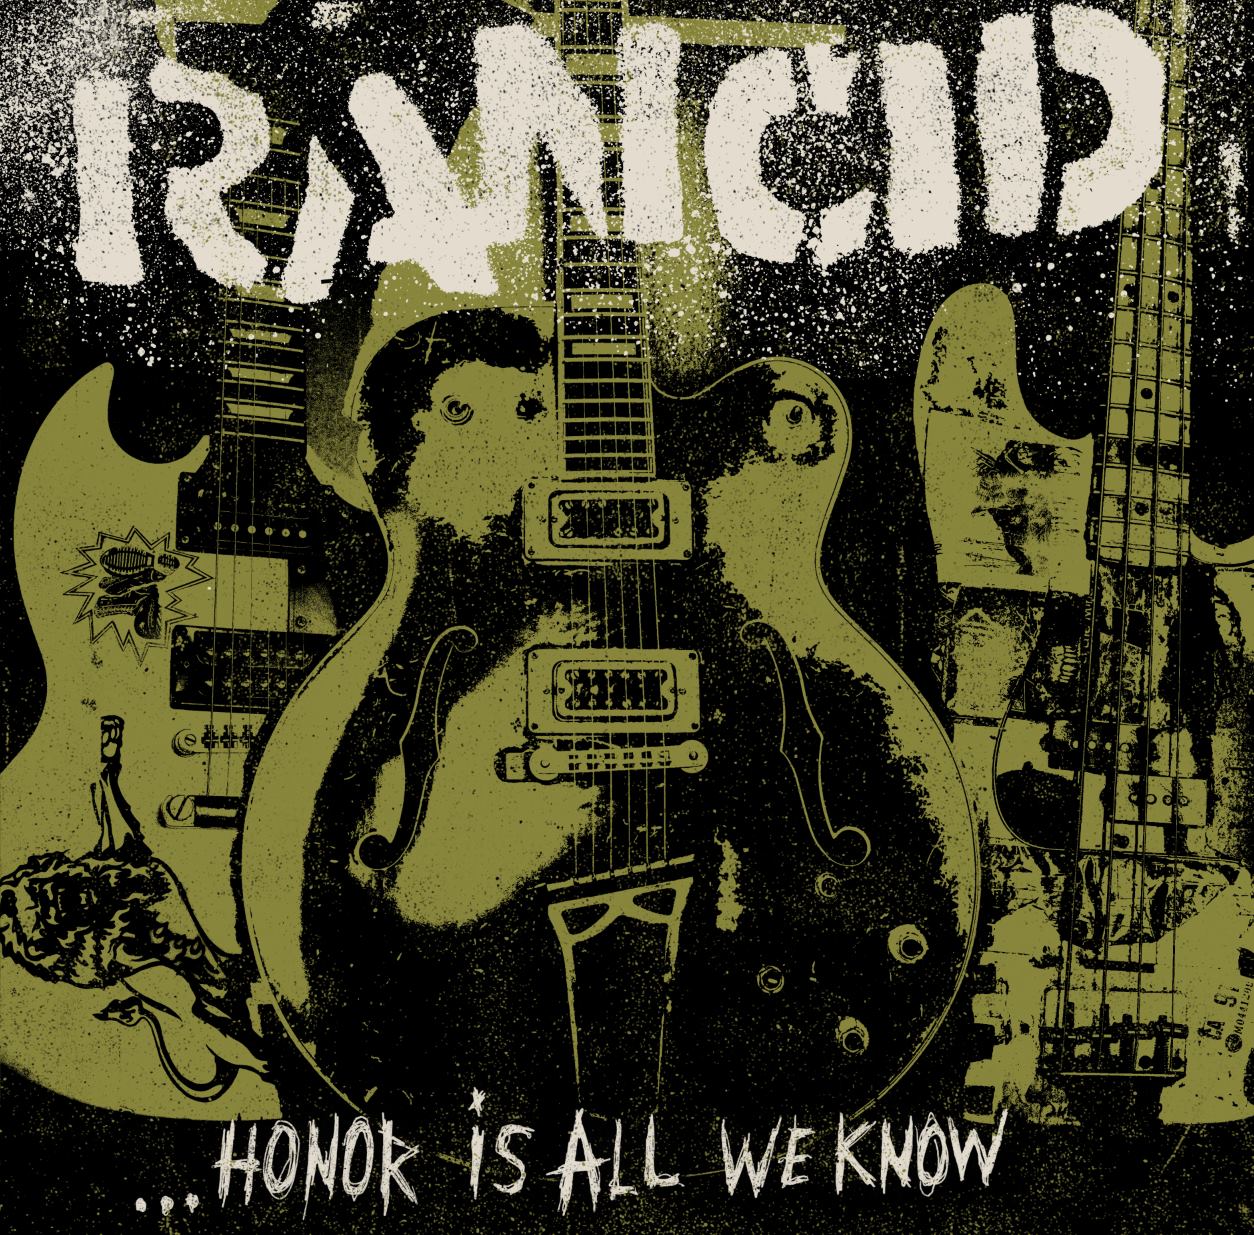 Rancid – Honor is all we know